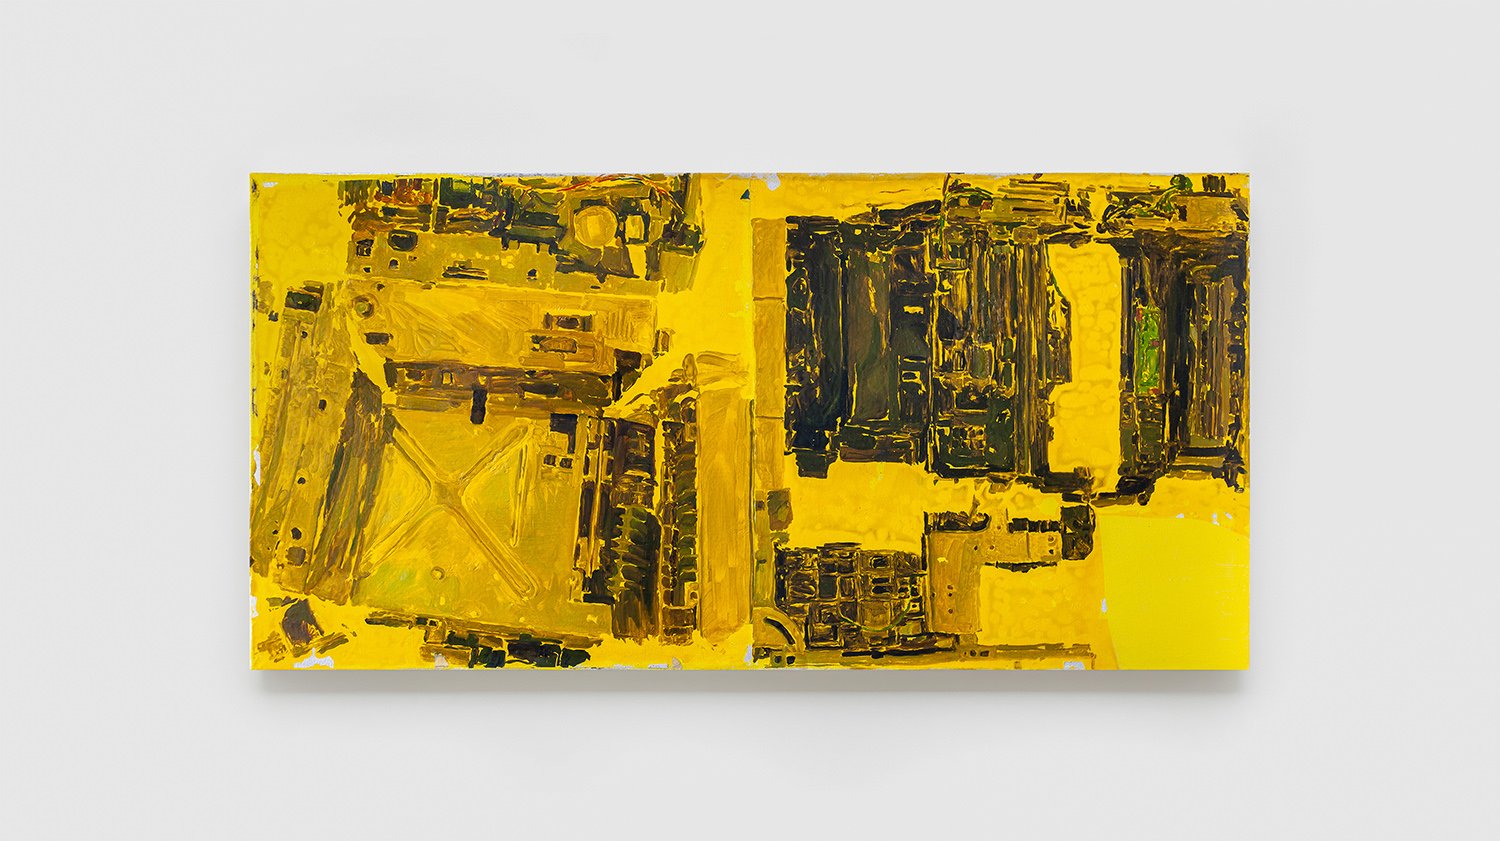   .76 Inches Per Minute (Panafax UF885), 2 023.  Oil, ink, and resin on canvas. 48 x 24 inches. 